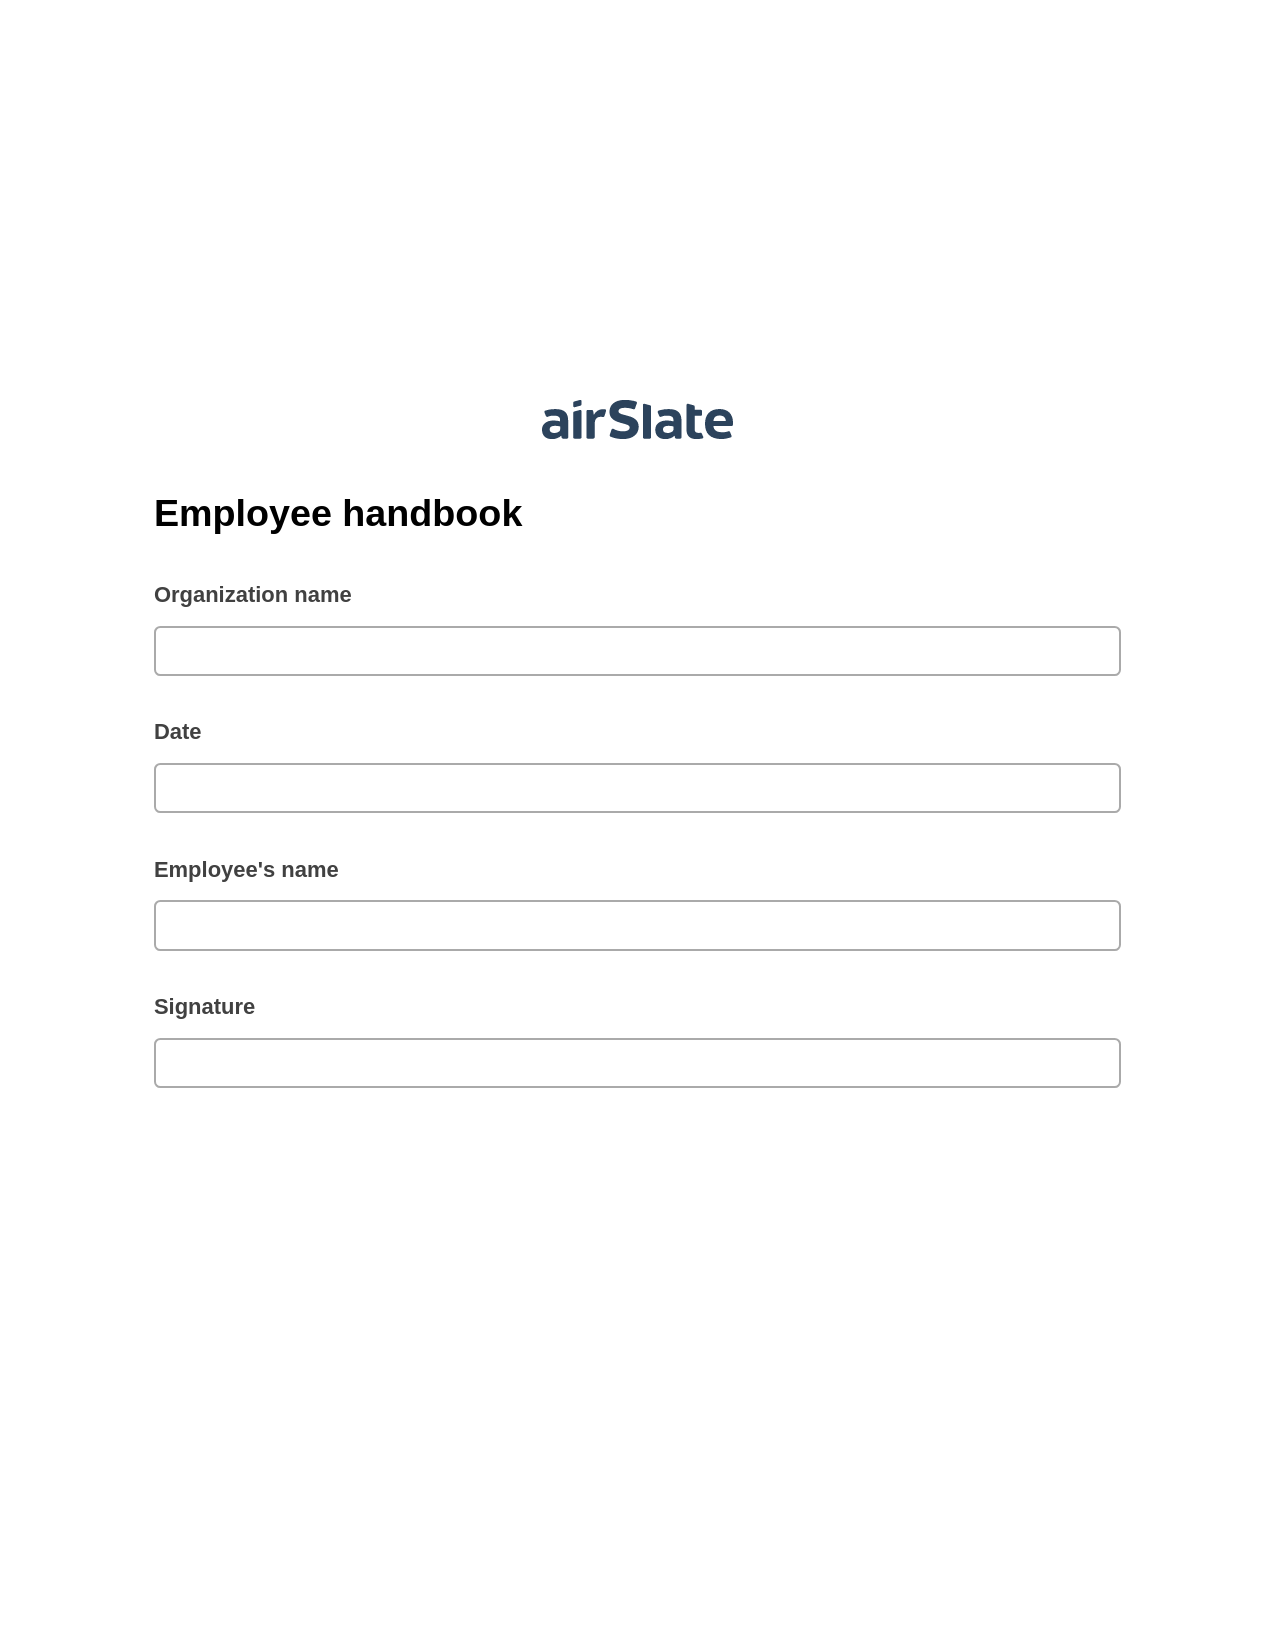 Employee handbook Pre-fill from Litmos bot, Add Tags to Slate Bot, Export to Smartsheet